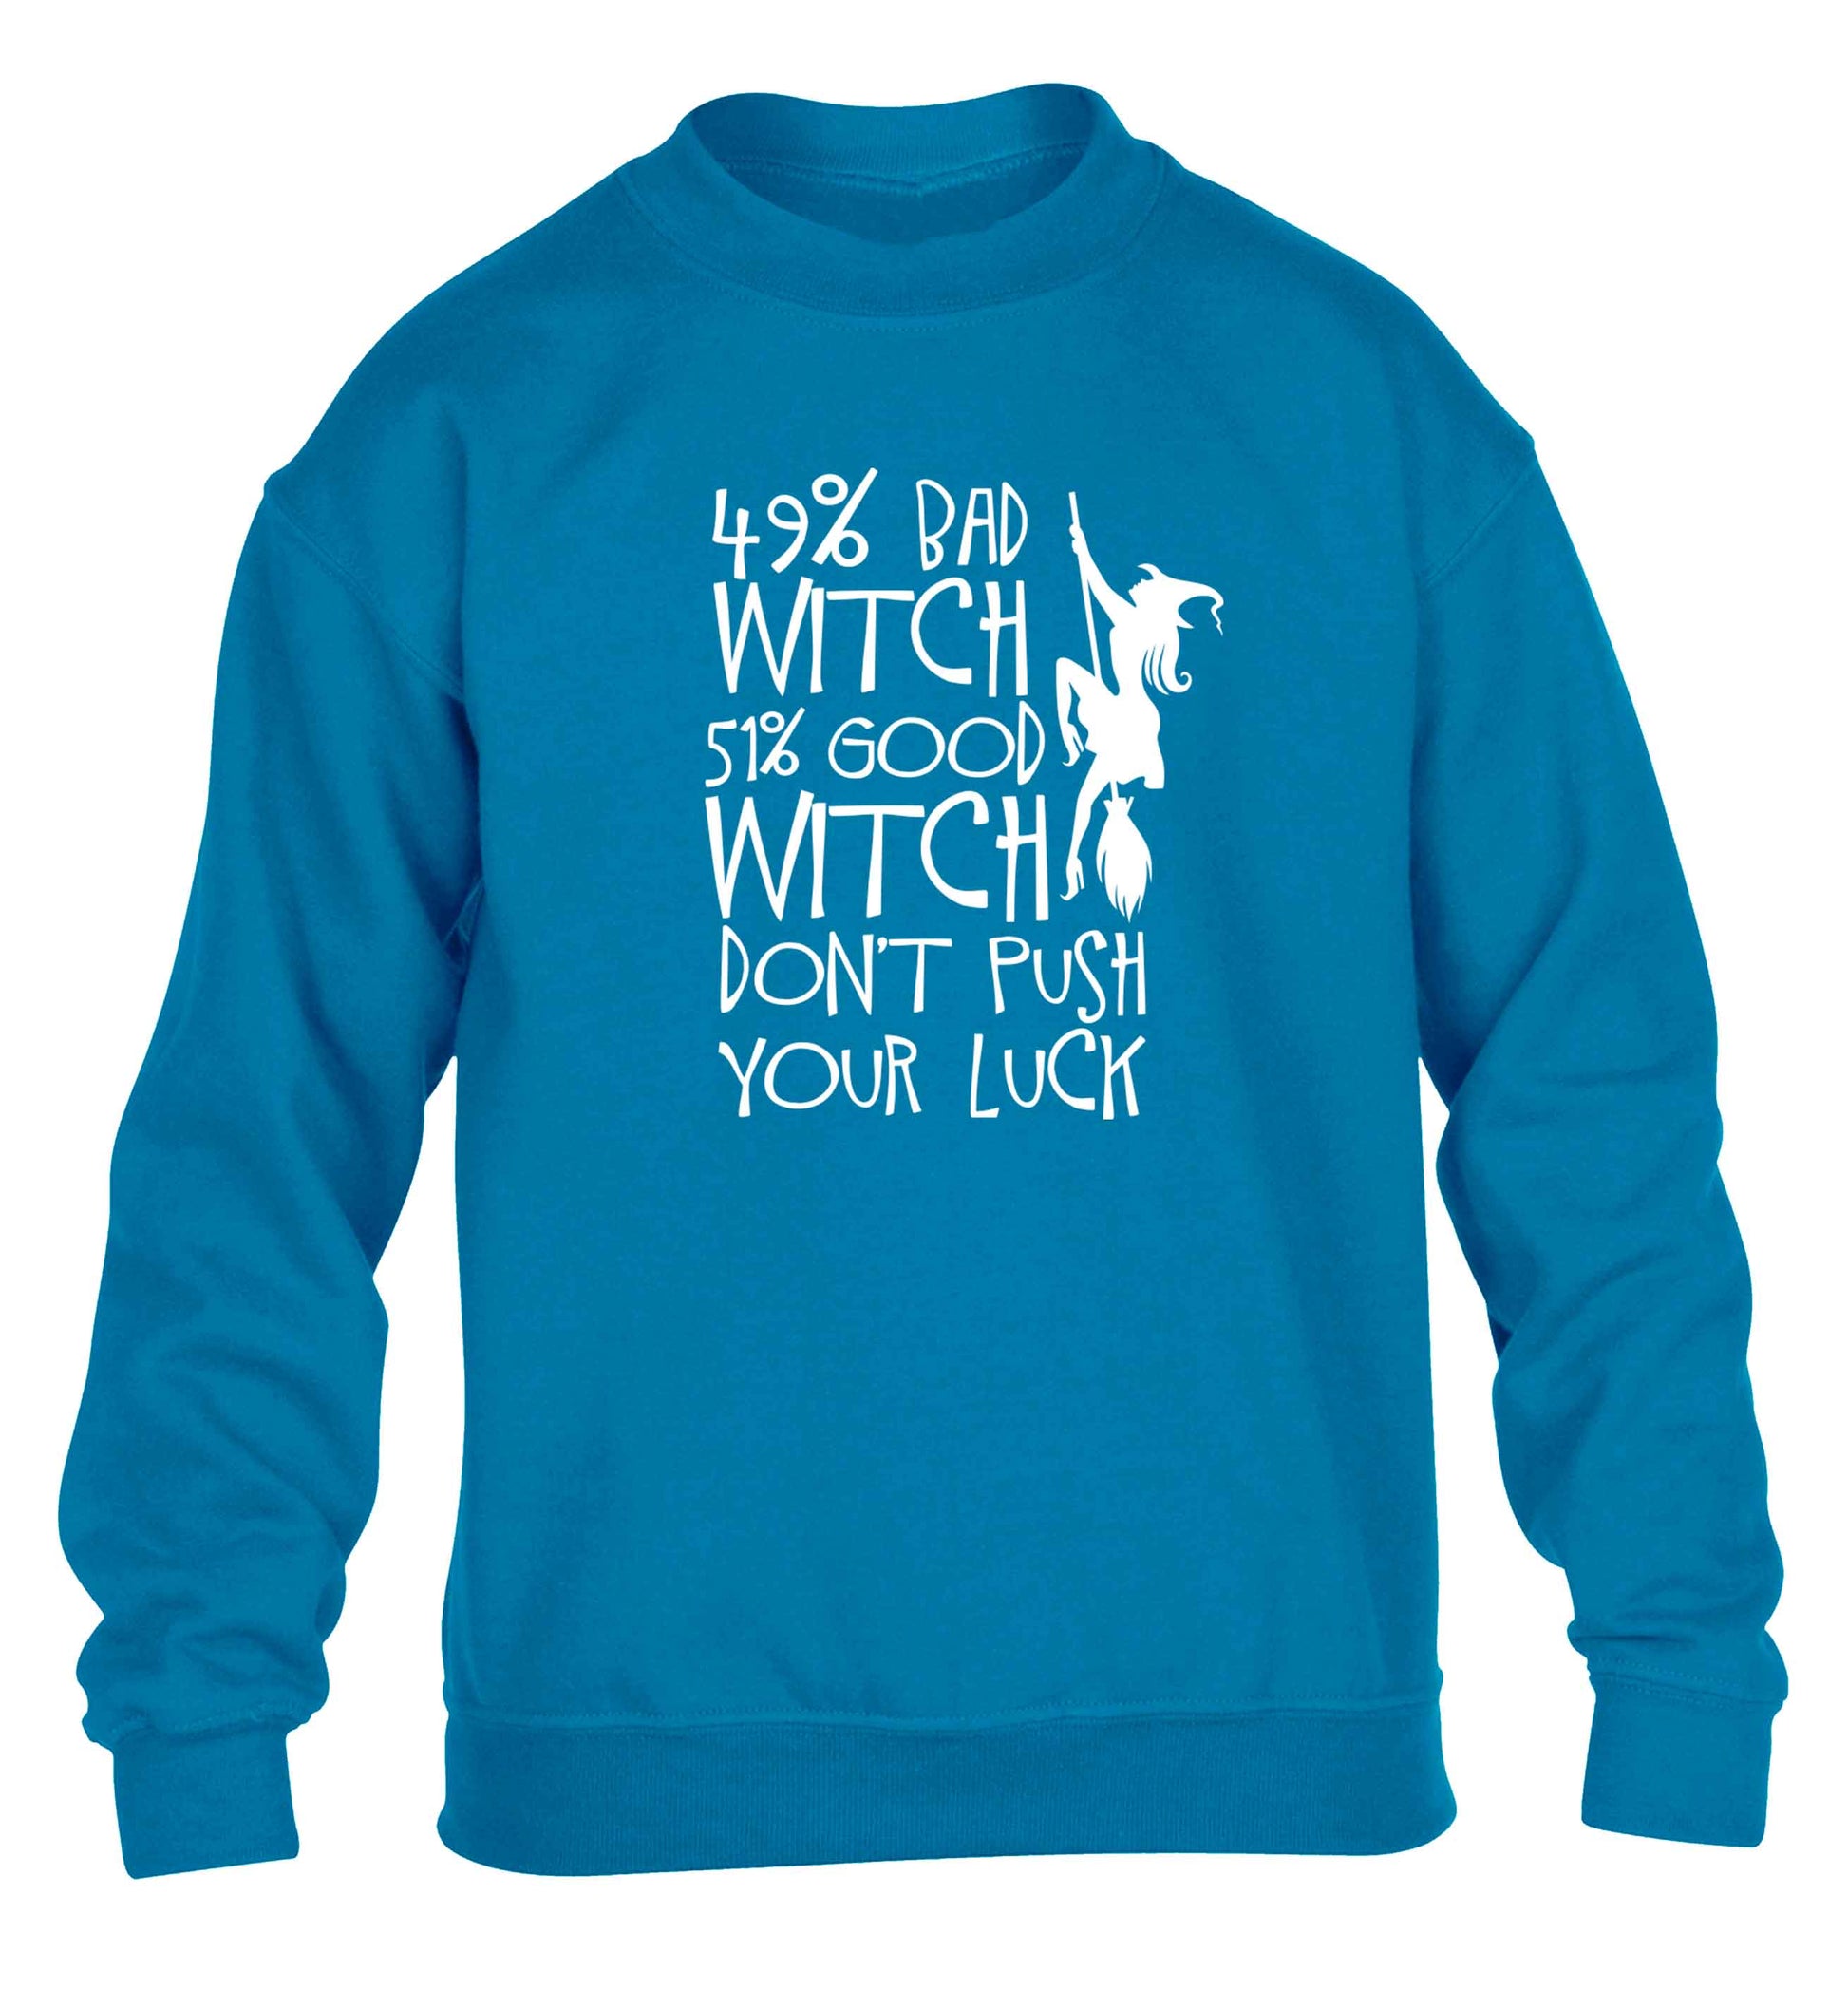 49% bad witch 51% good witch don't push your luck children's blue sweater 12-13 Years